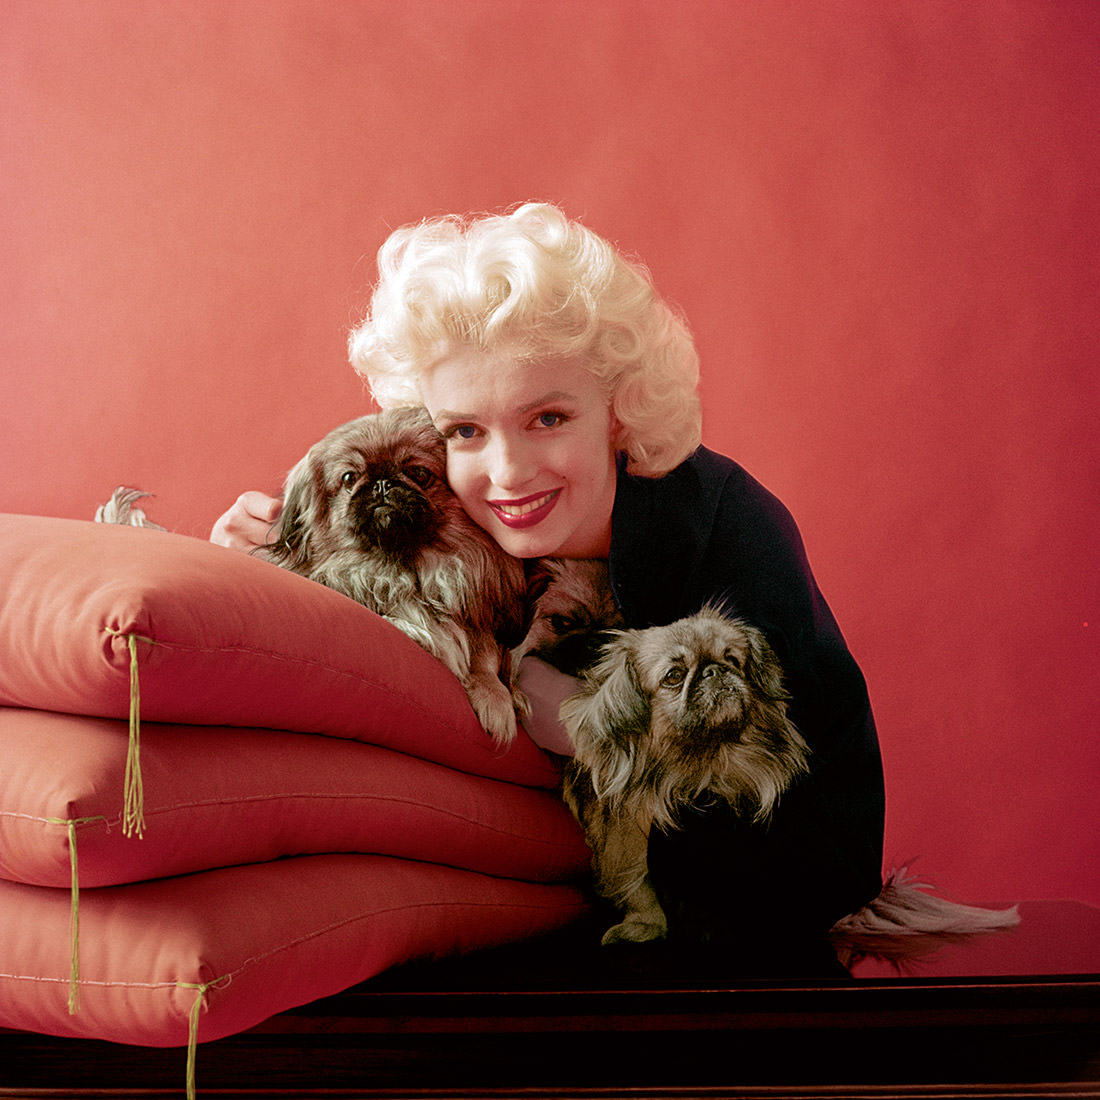 Monroe poses with Pekingese dogs that were part of a Look magazine shoot in February 1955.